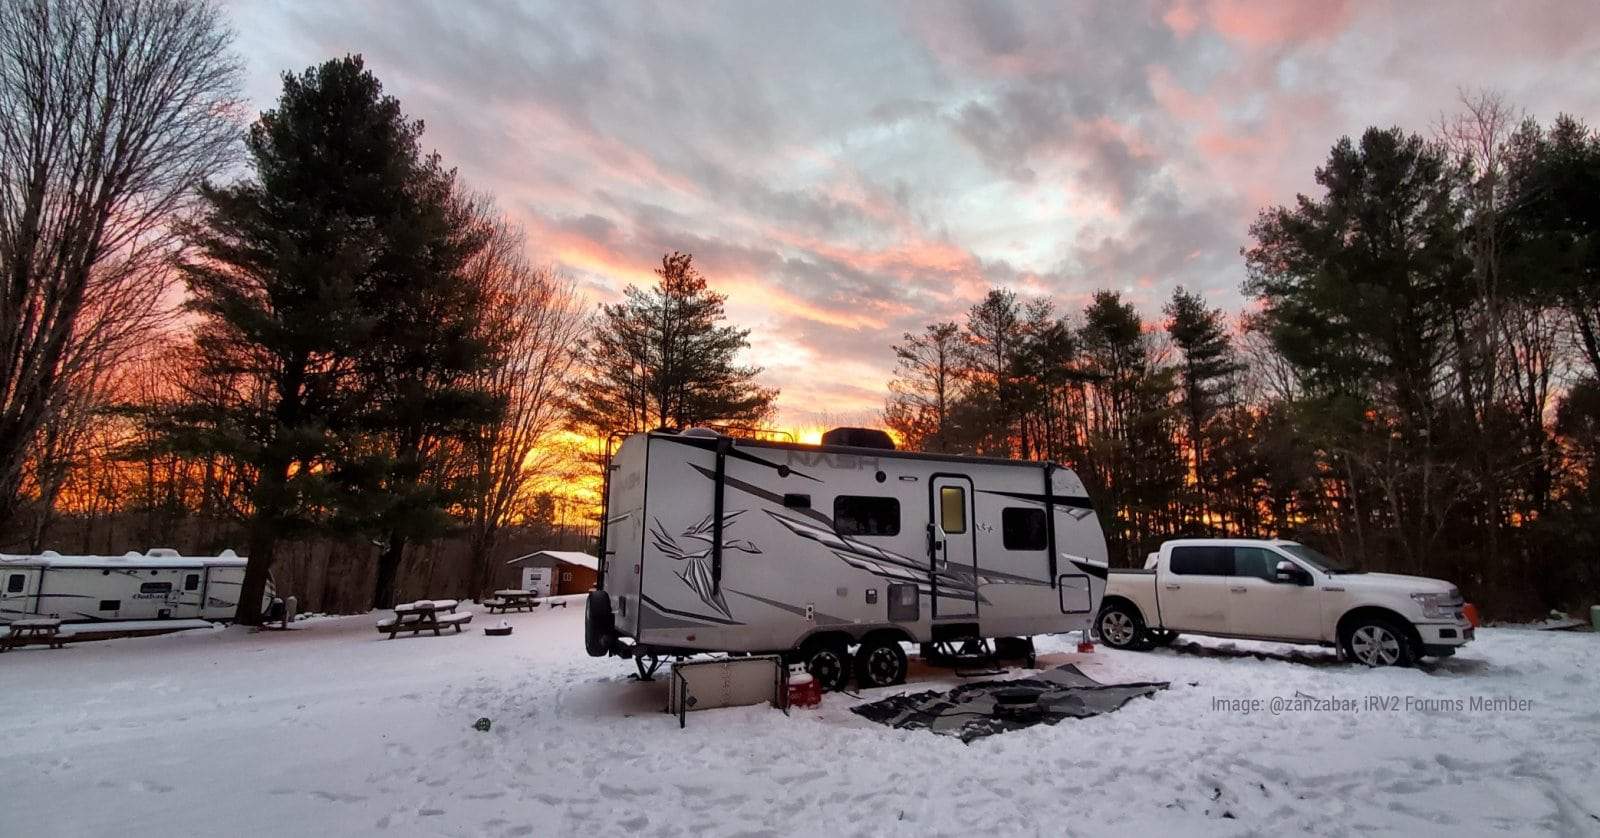 Nash 23D Cold Weather RV Camping (Image: @Zanzabar, iRV2 Forums Member)